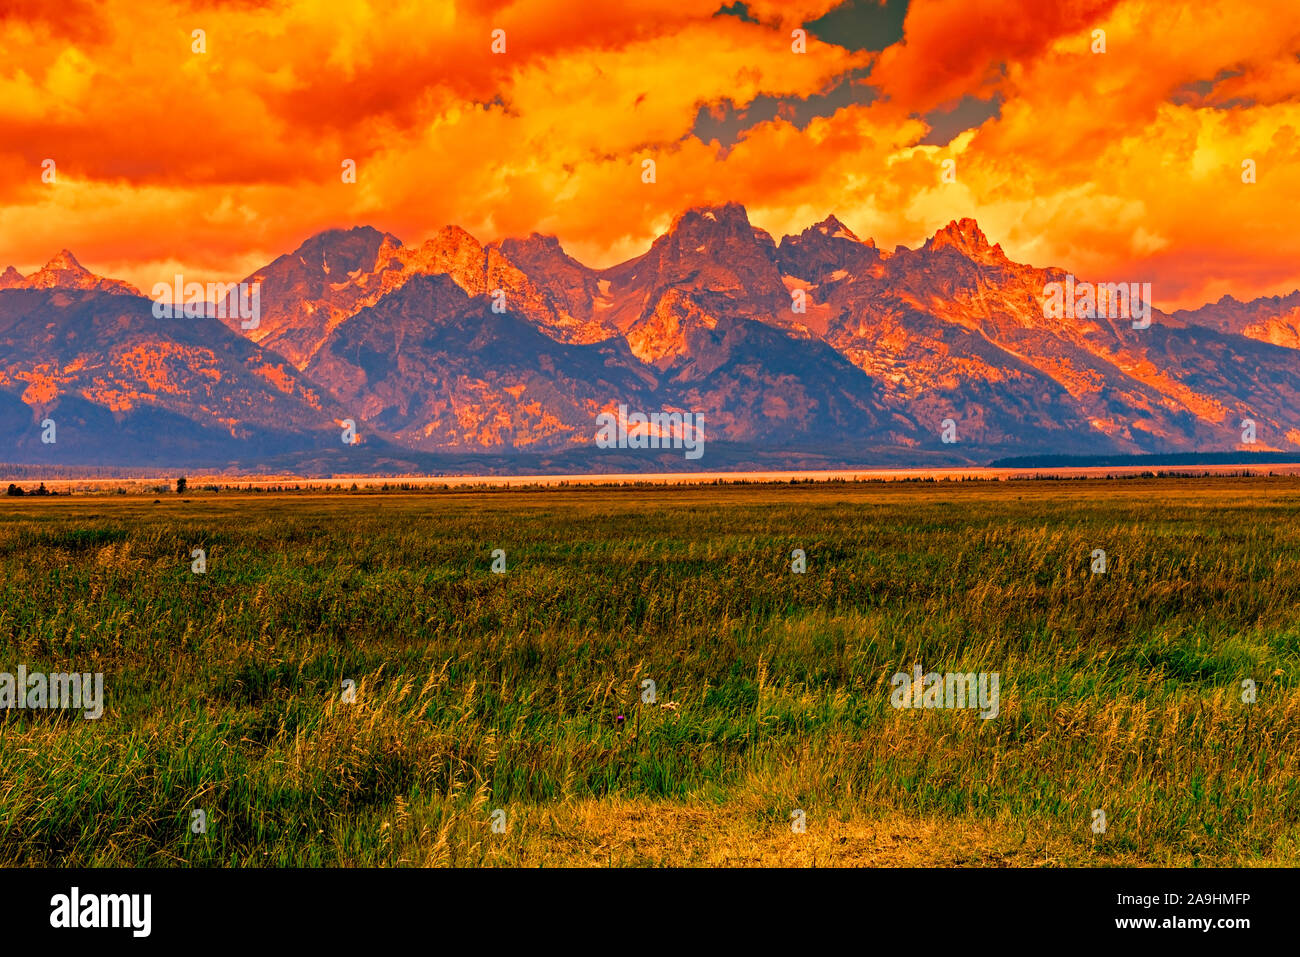 Sunset over Grand Teton National Park, tall Rocky Mountains, green grassy fields under a colorful cloudy sky. Stock Photo